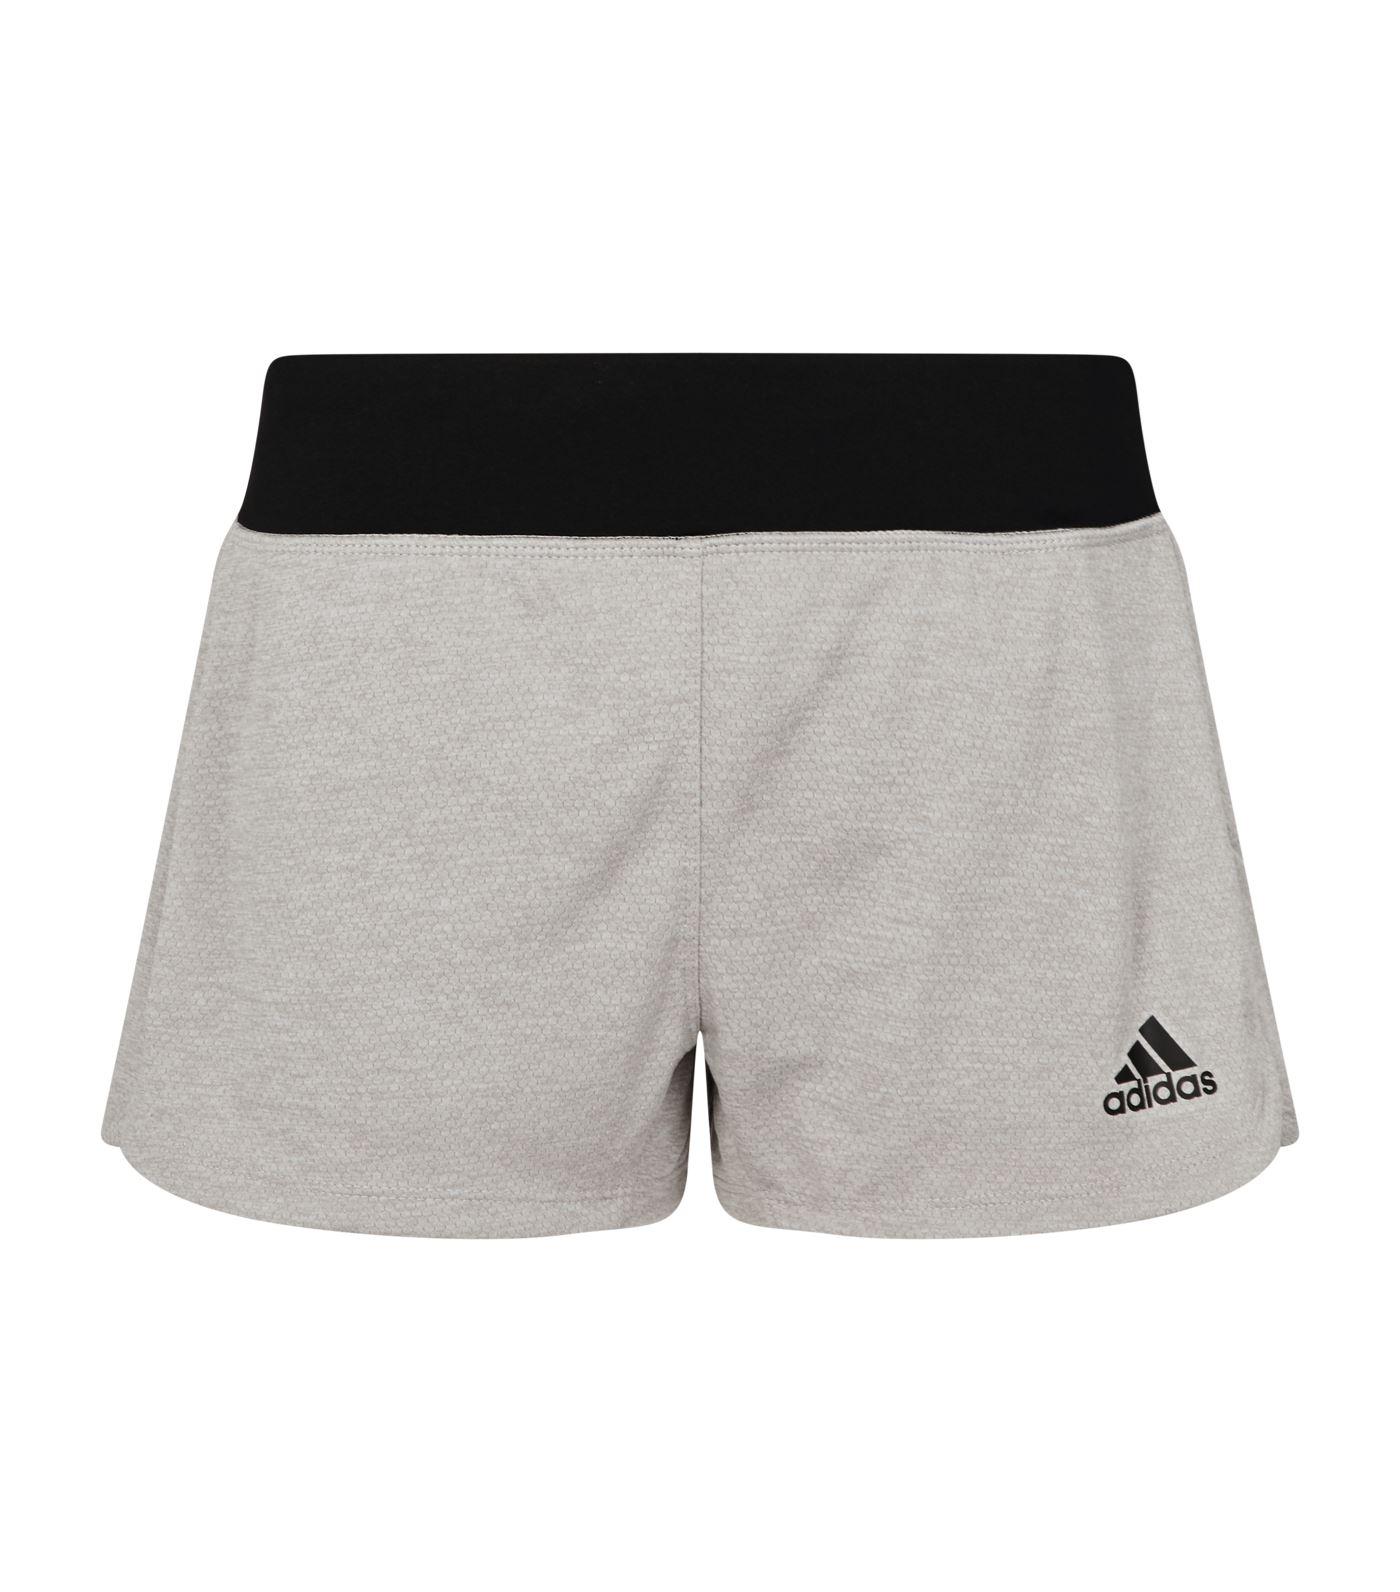 adidas 2-in-1 Shorts in Gray - Lyst